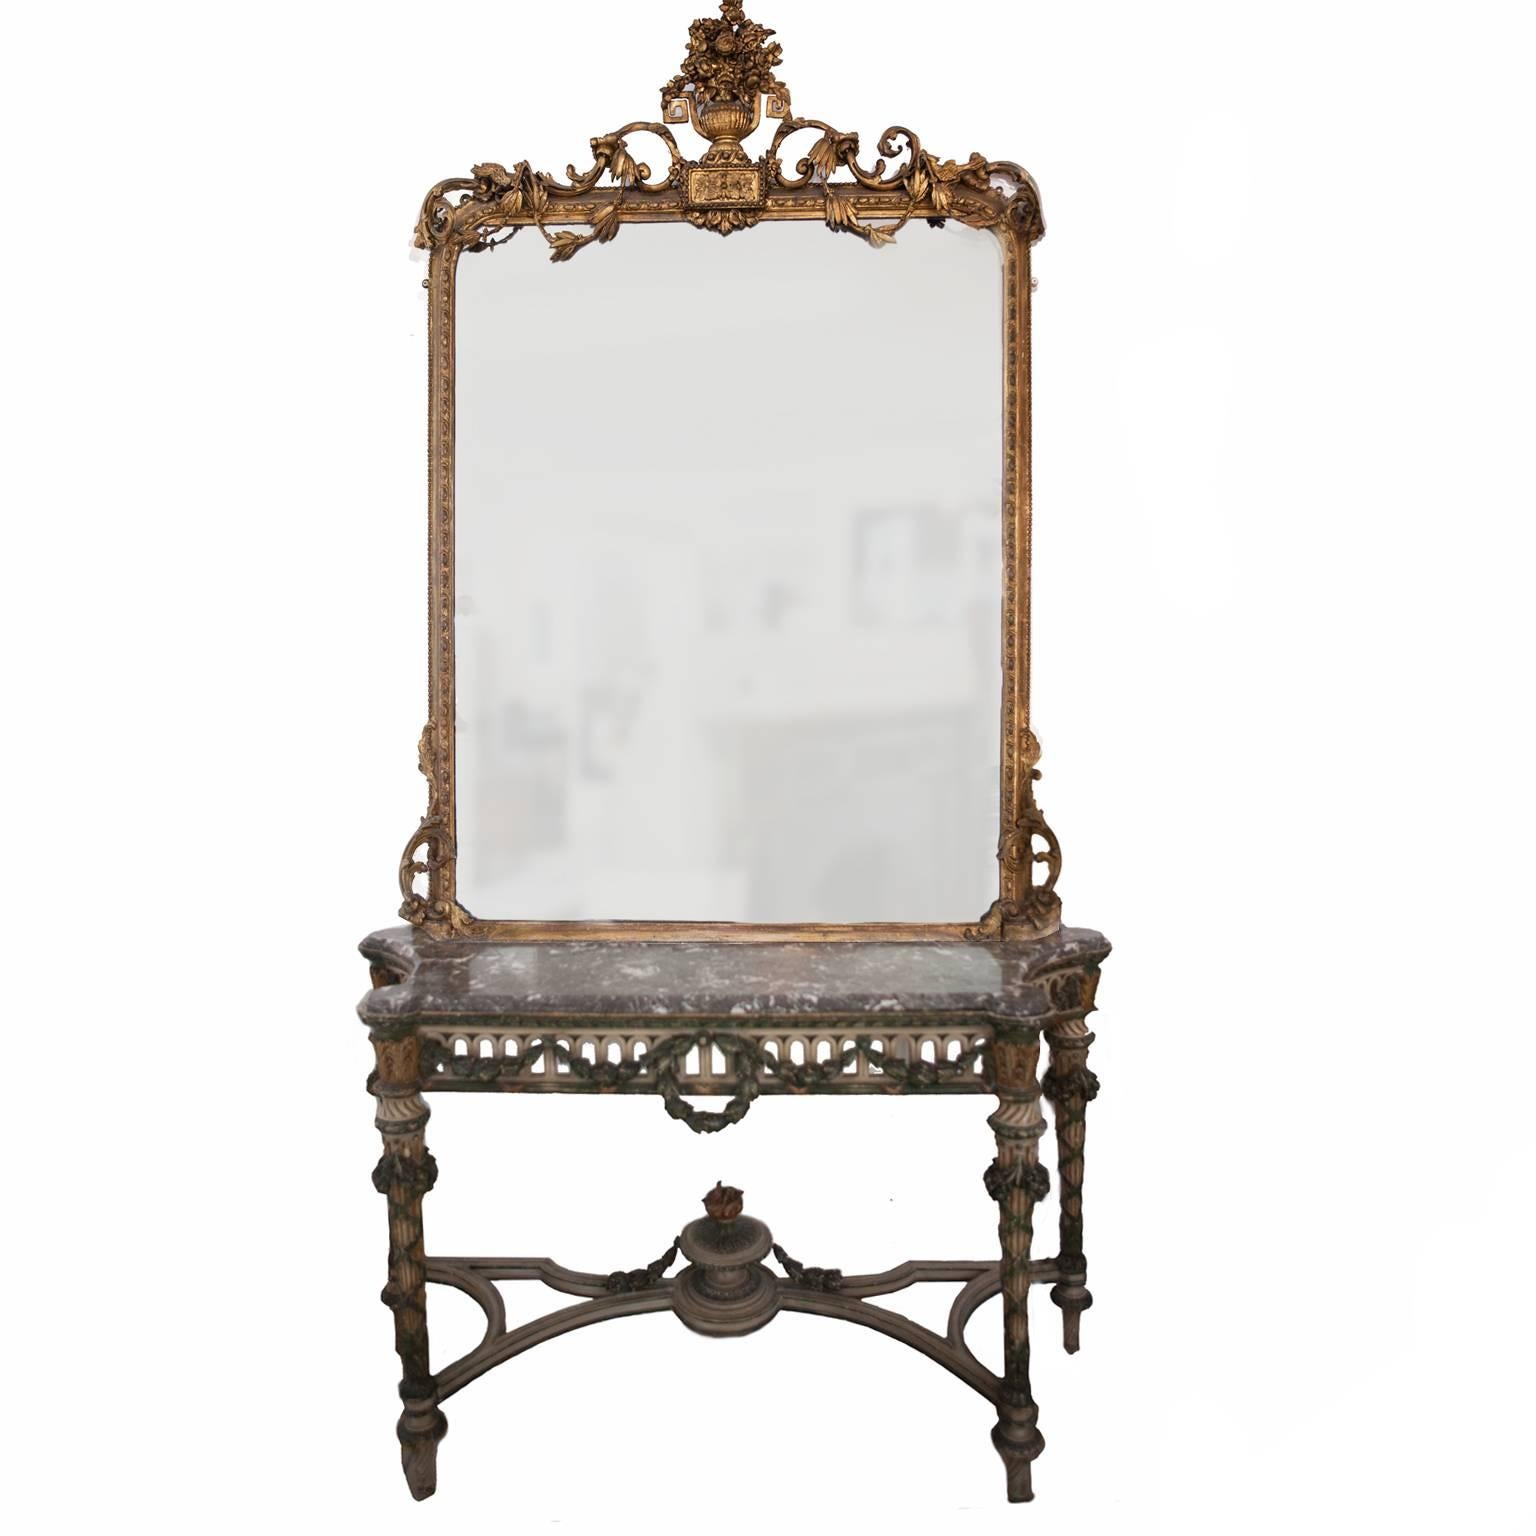 Early Victorian 19th Century Gilt and Gesso Overmantel Mirror